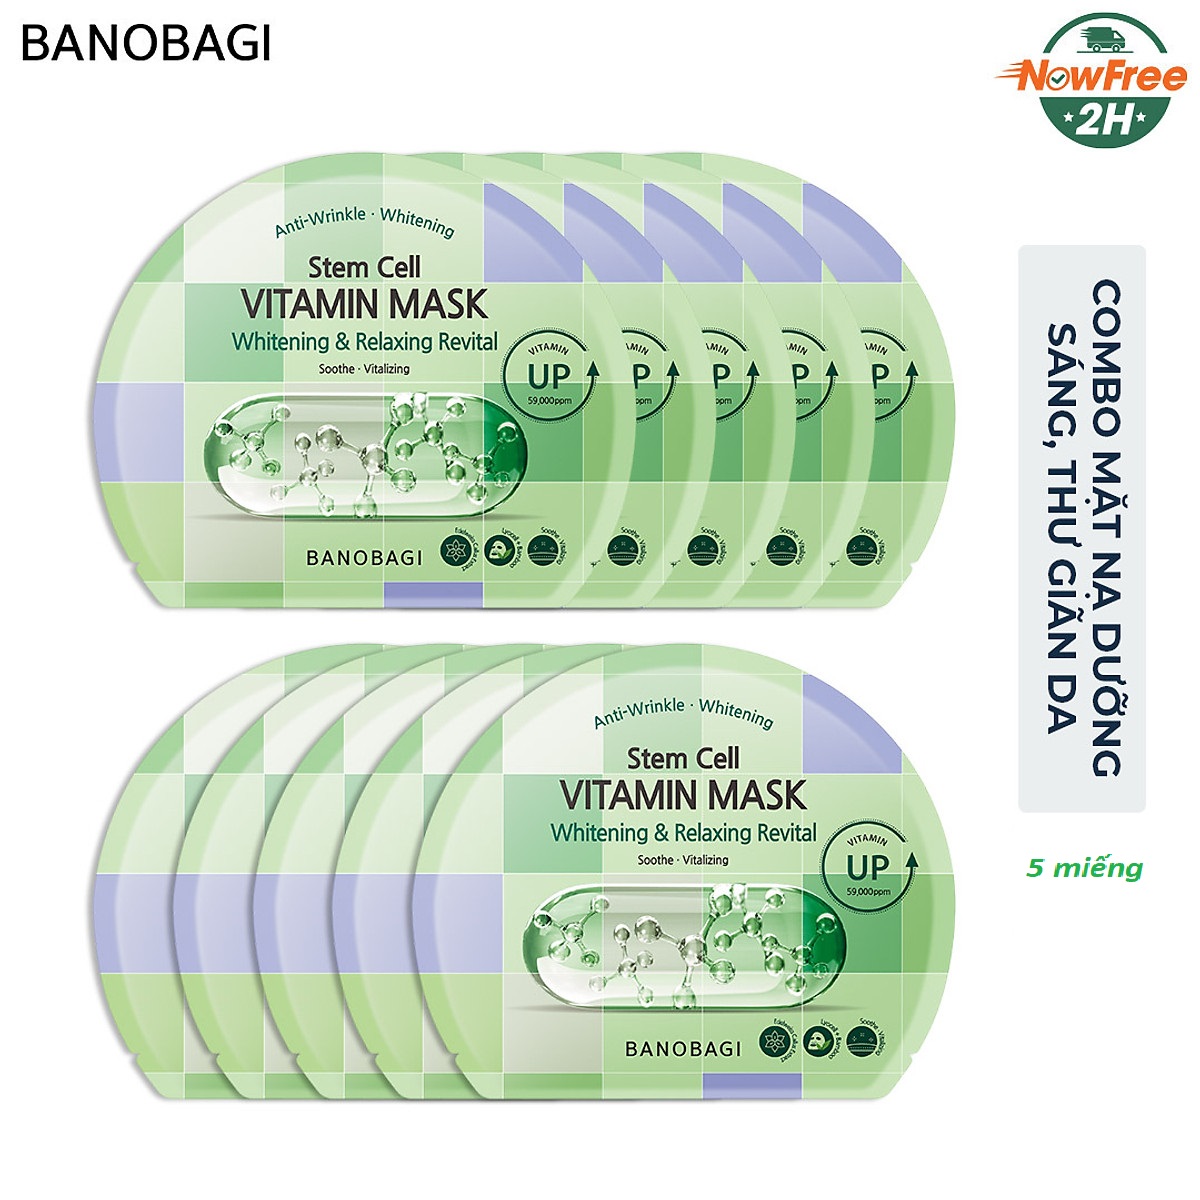 combo 5 miếng Mặt Nạ Banobagi Stem Cell Vitamin Mask Whitening and Relaxing Revital 30g-xanh lá